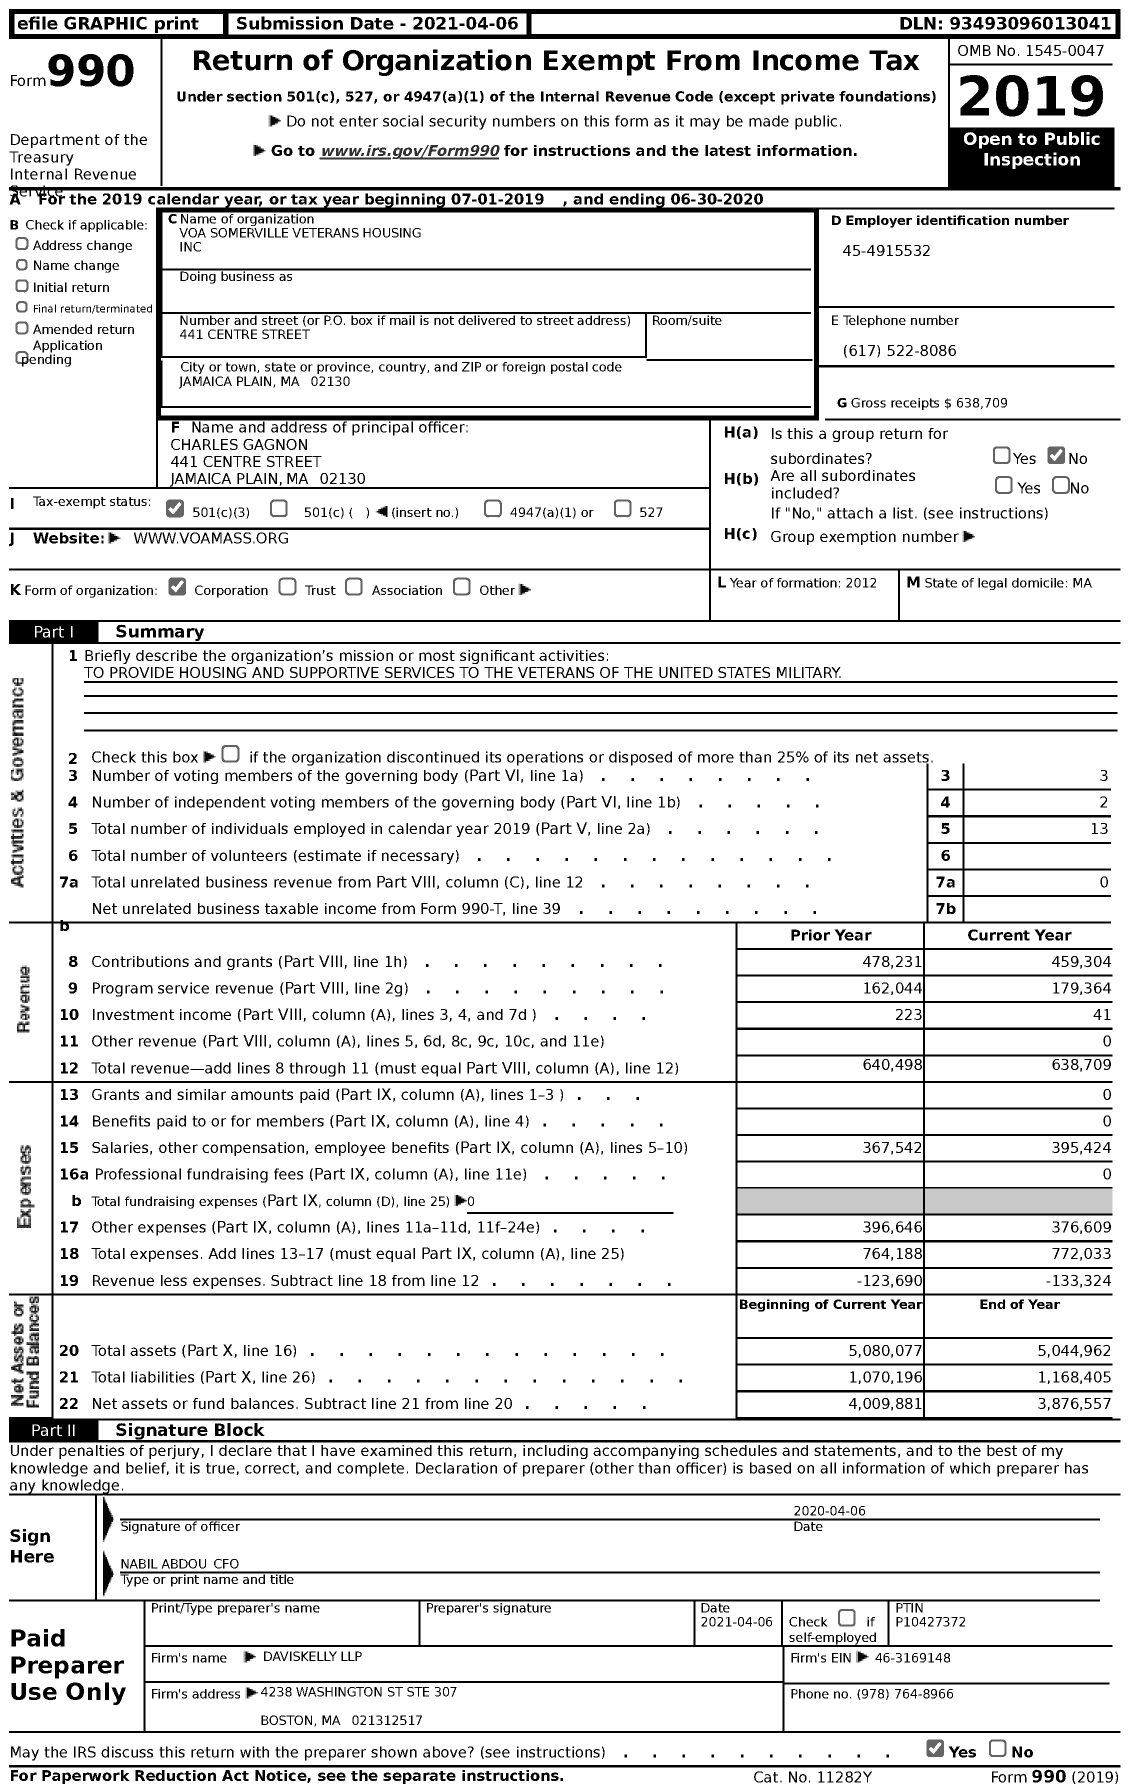 Image of first page of 2019 Form 990 for Volunteers of America - VOA Somerville Veterans Housing